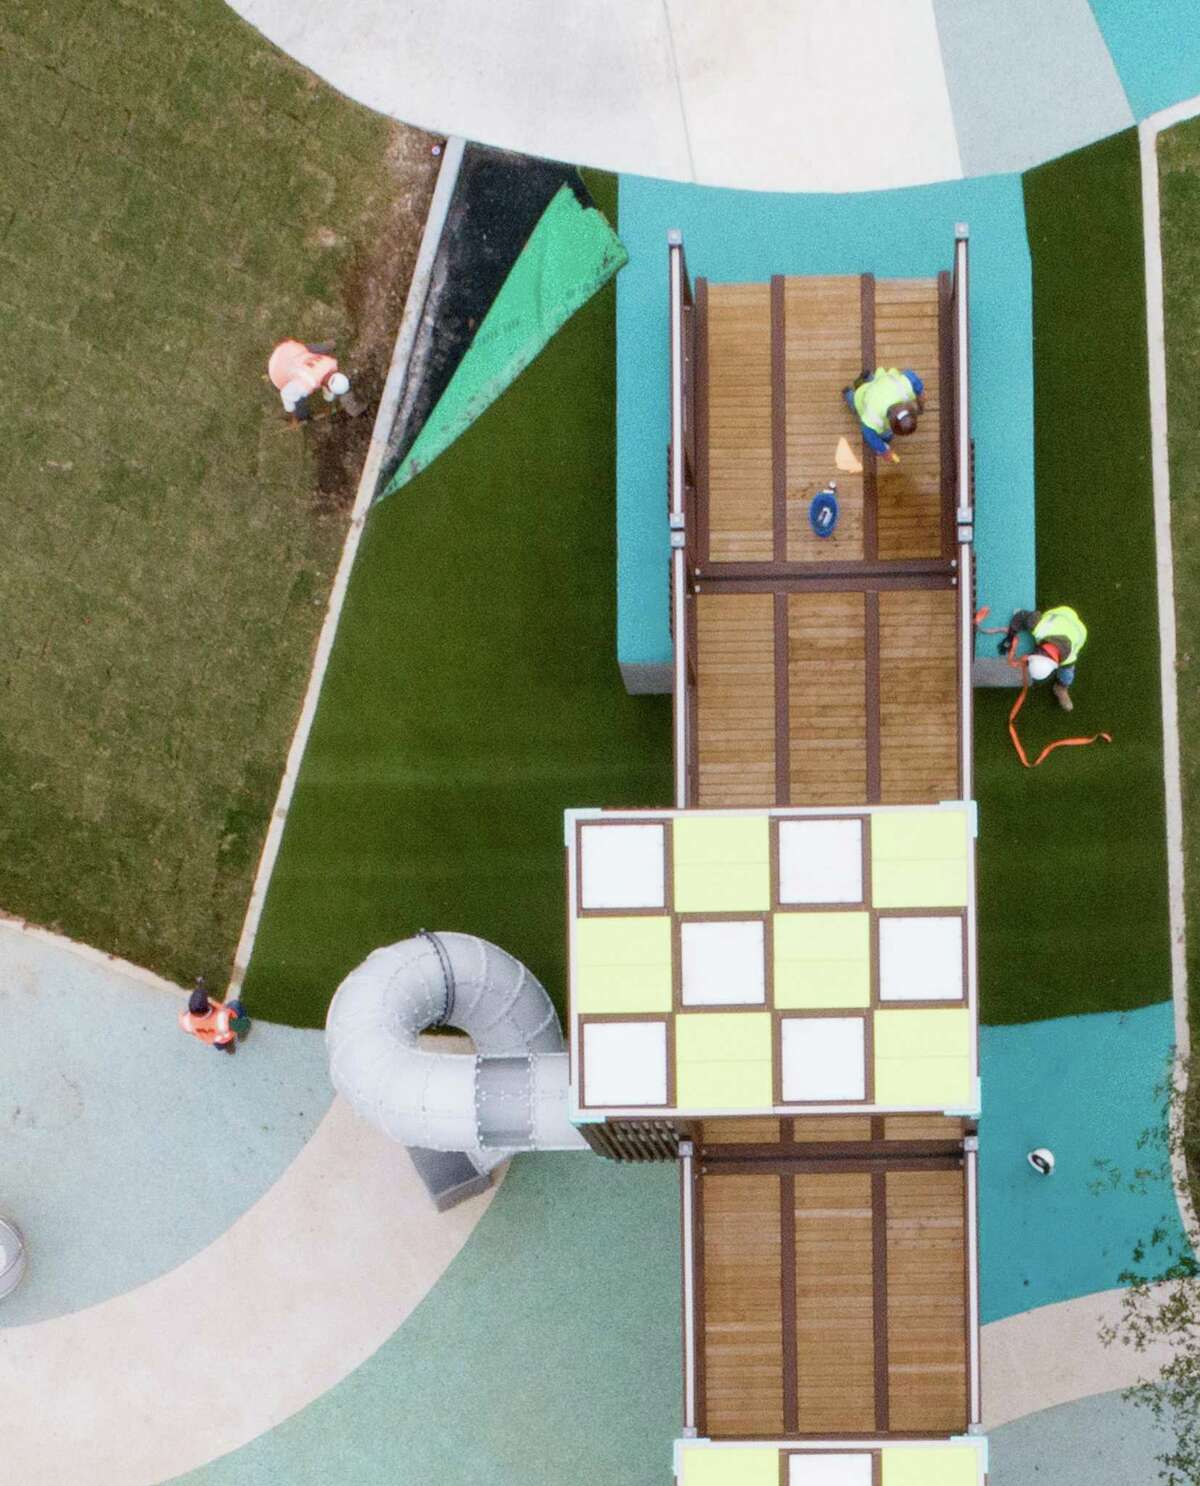 A drone photo of workers putting on the final touches on an all inclusive playground at James Driver Park in Aldine on Tuesday, Dec. 7, 2021. The park, which features playground equipment appropriate for children with a variety of abilities, officially opens on Saturday.